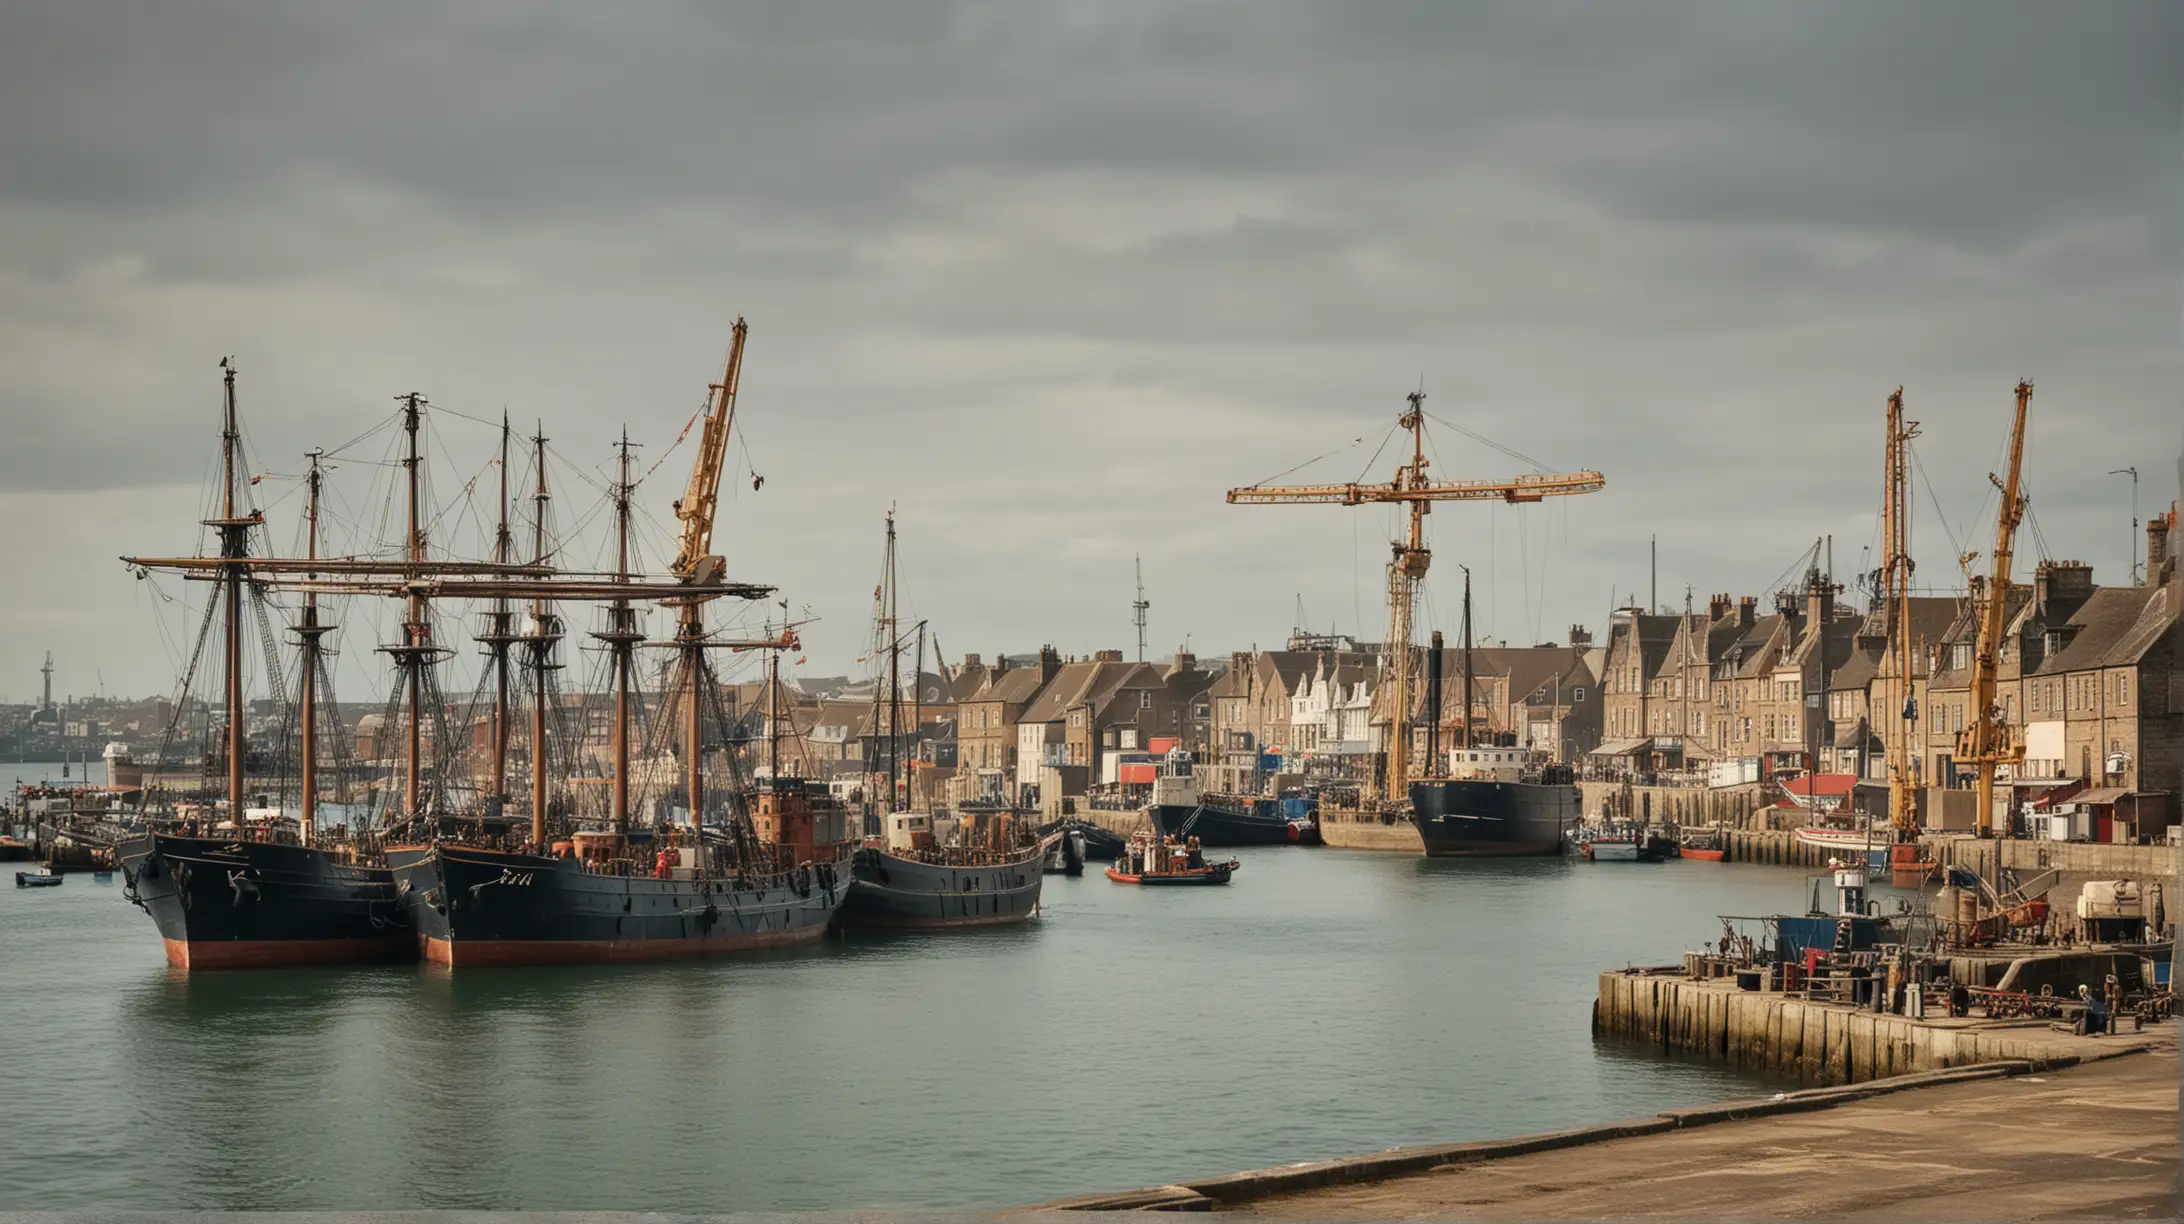 Old English Trade Port with Sea View and Cranes